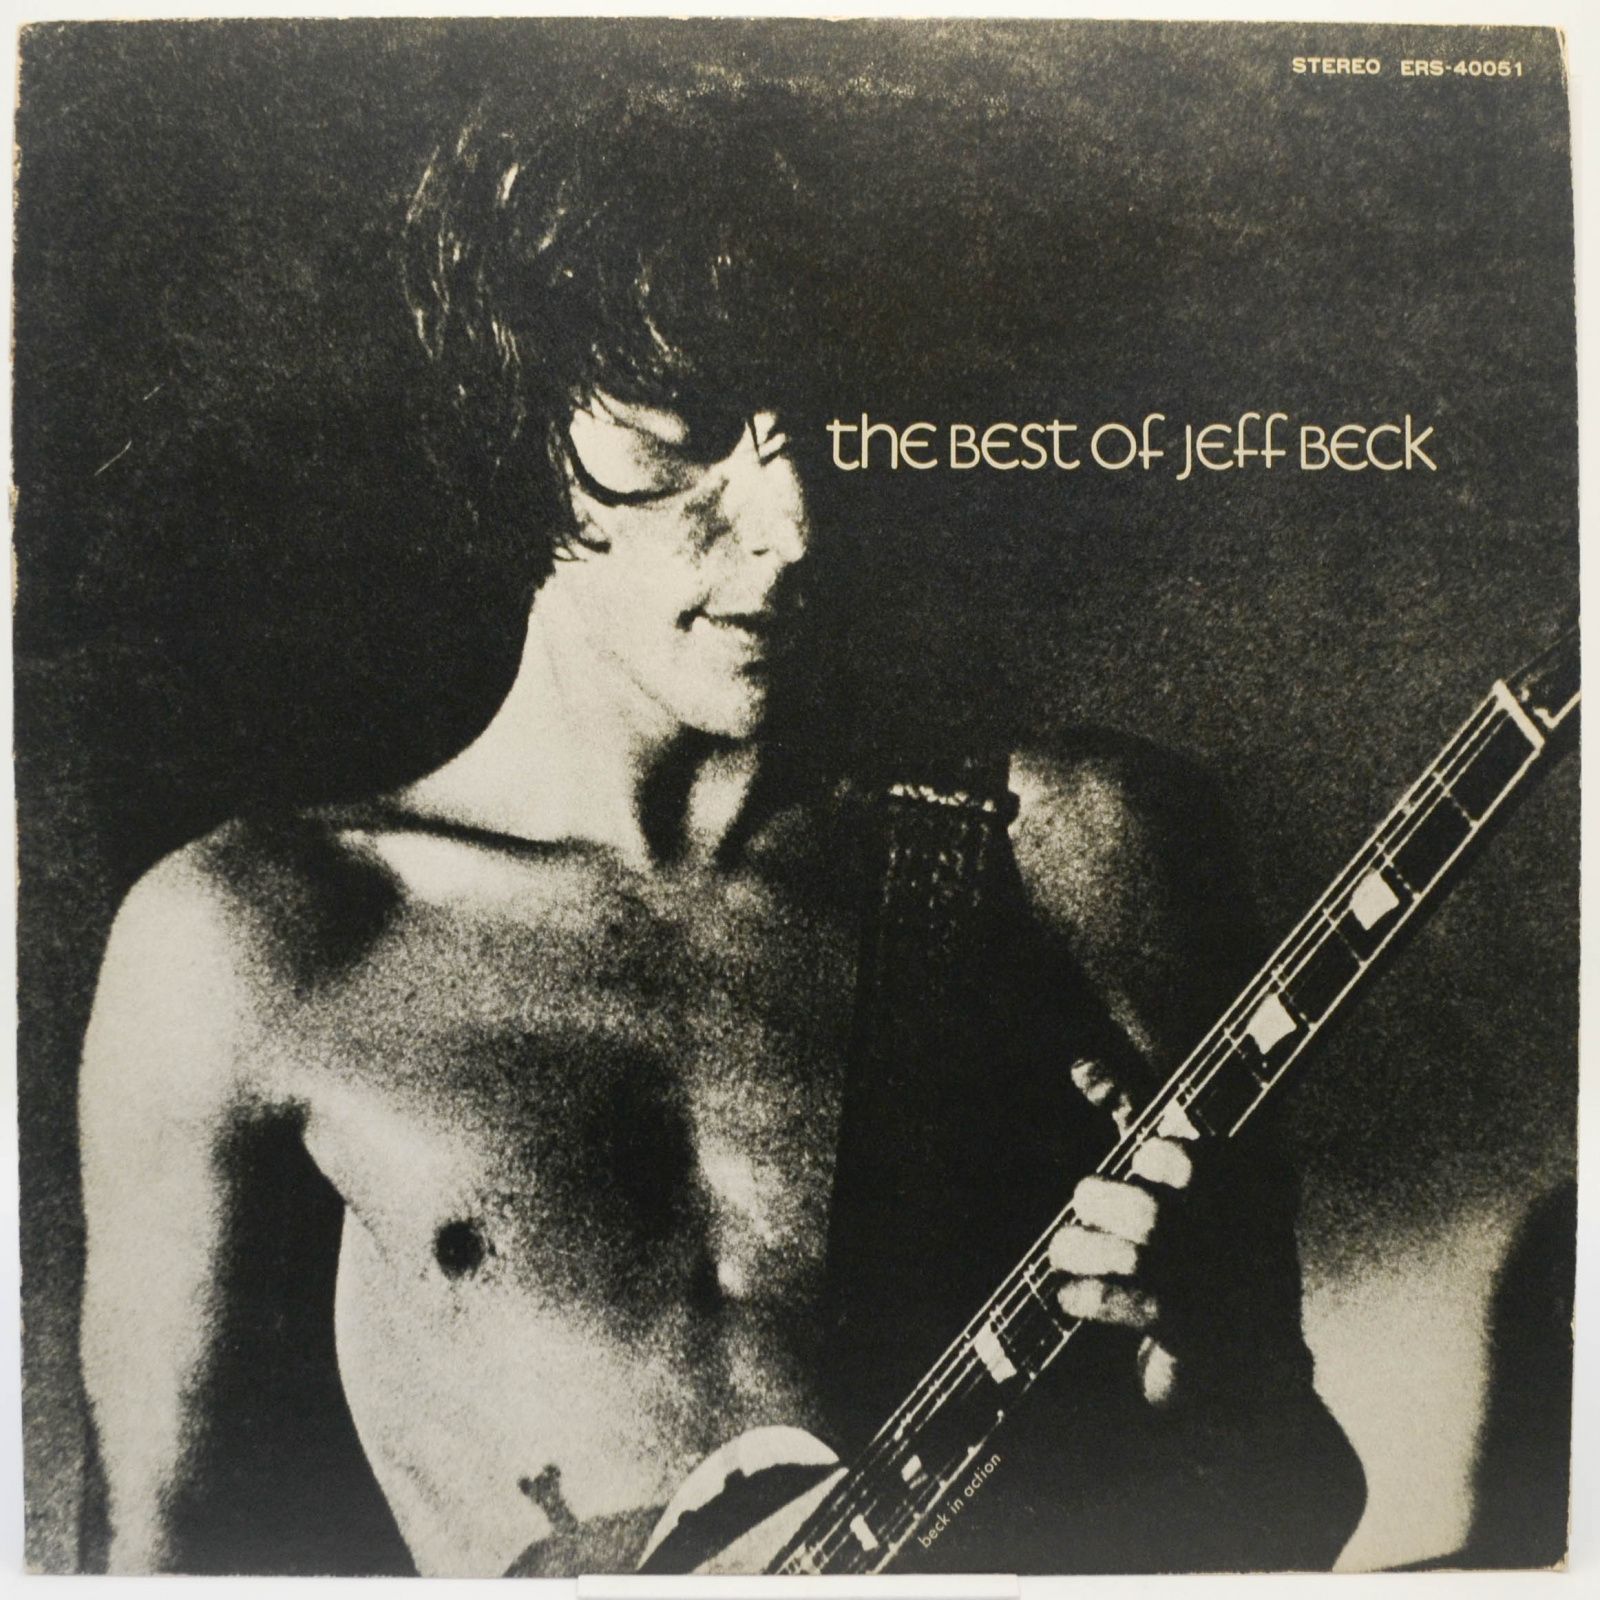 Jeff Beck — The Best Of Jeff Beck, 1978